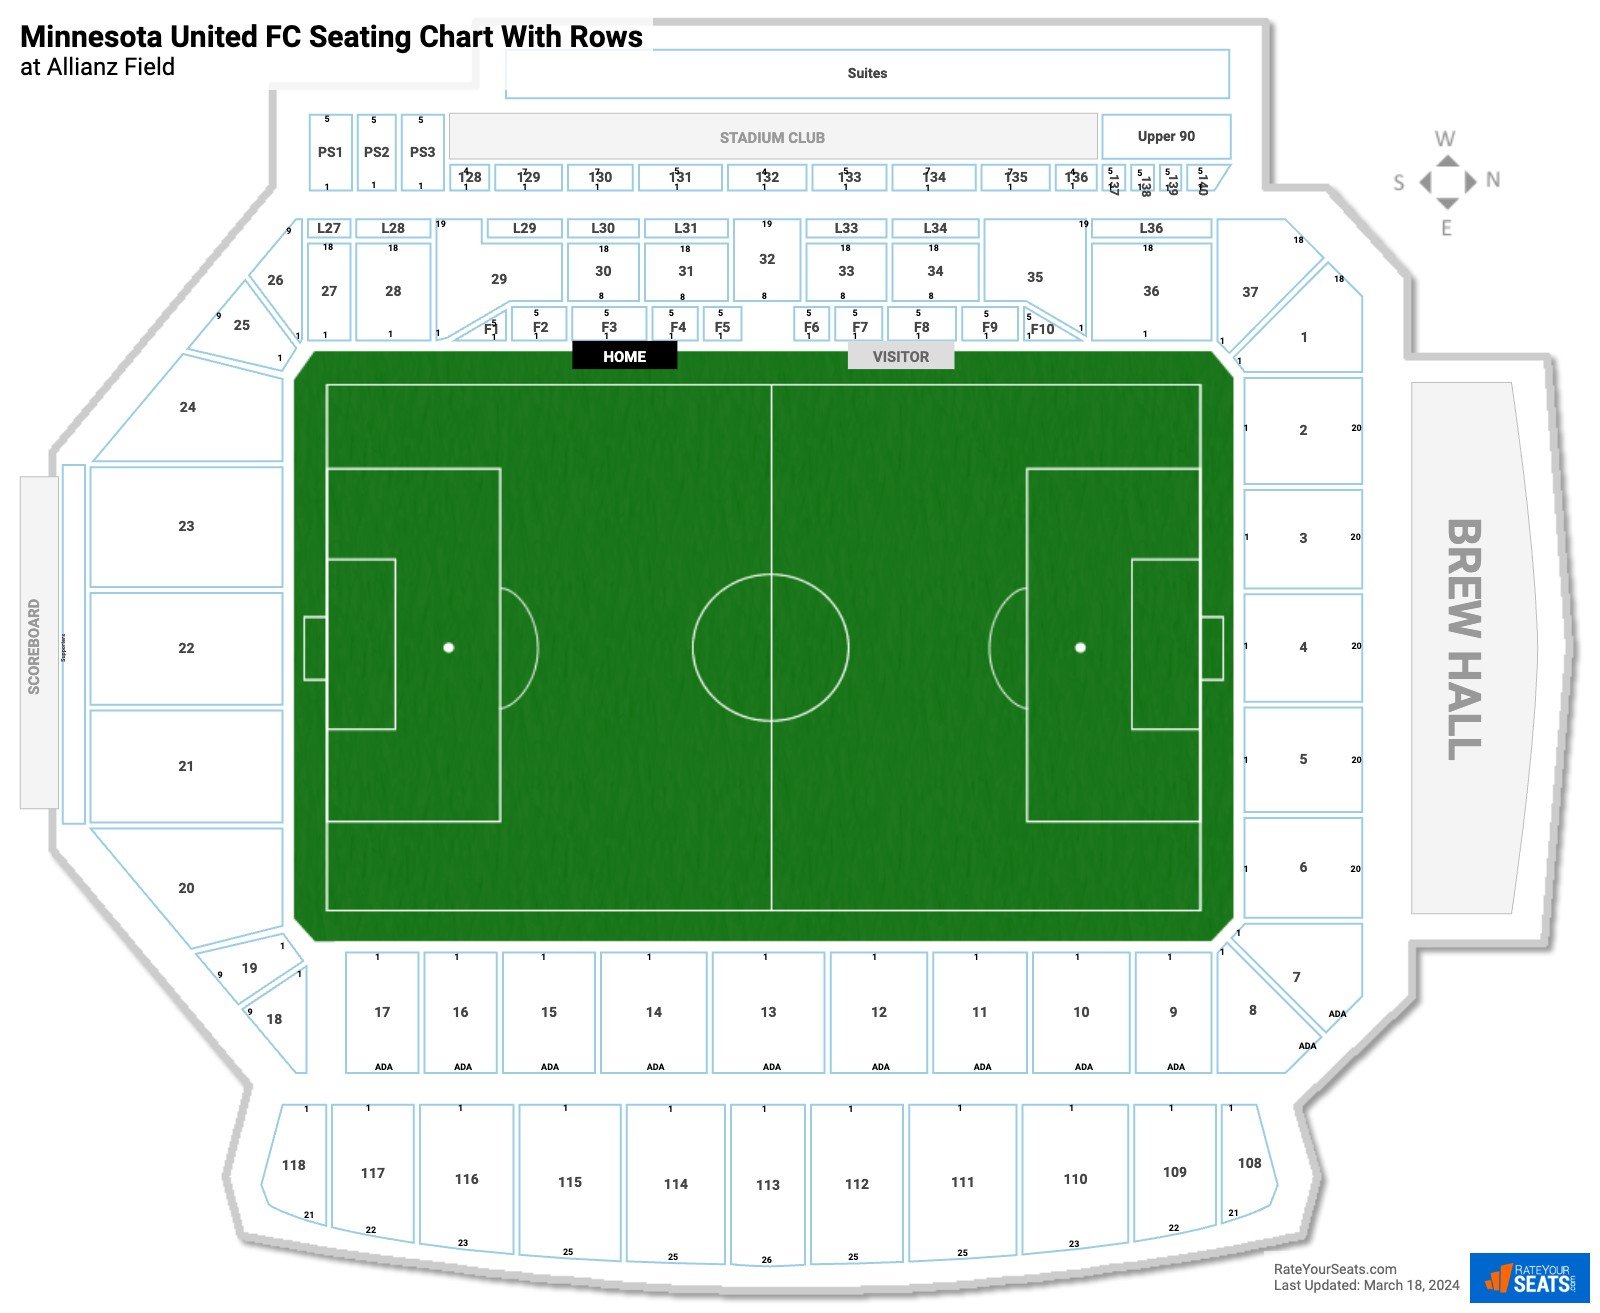 Allianz Field seating chart with row numbers